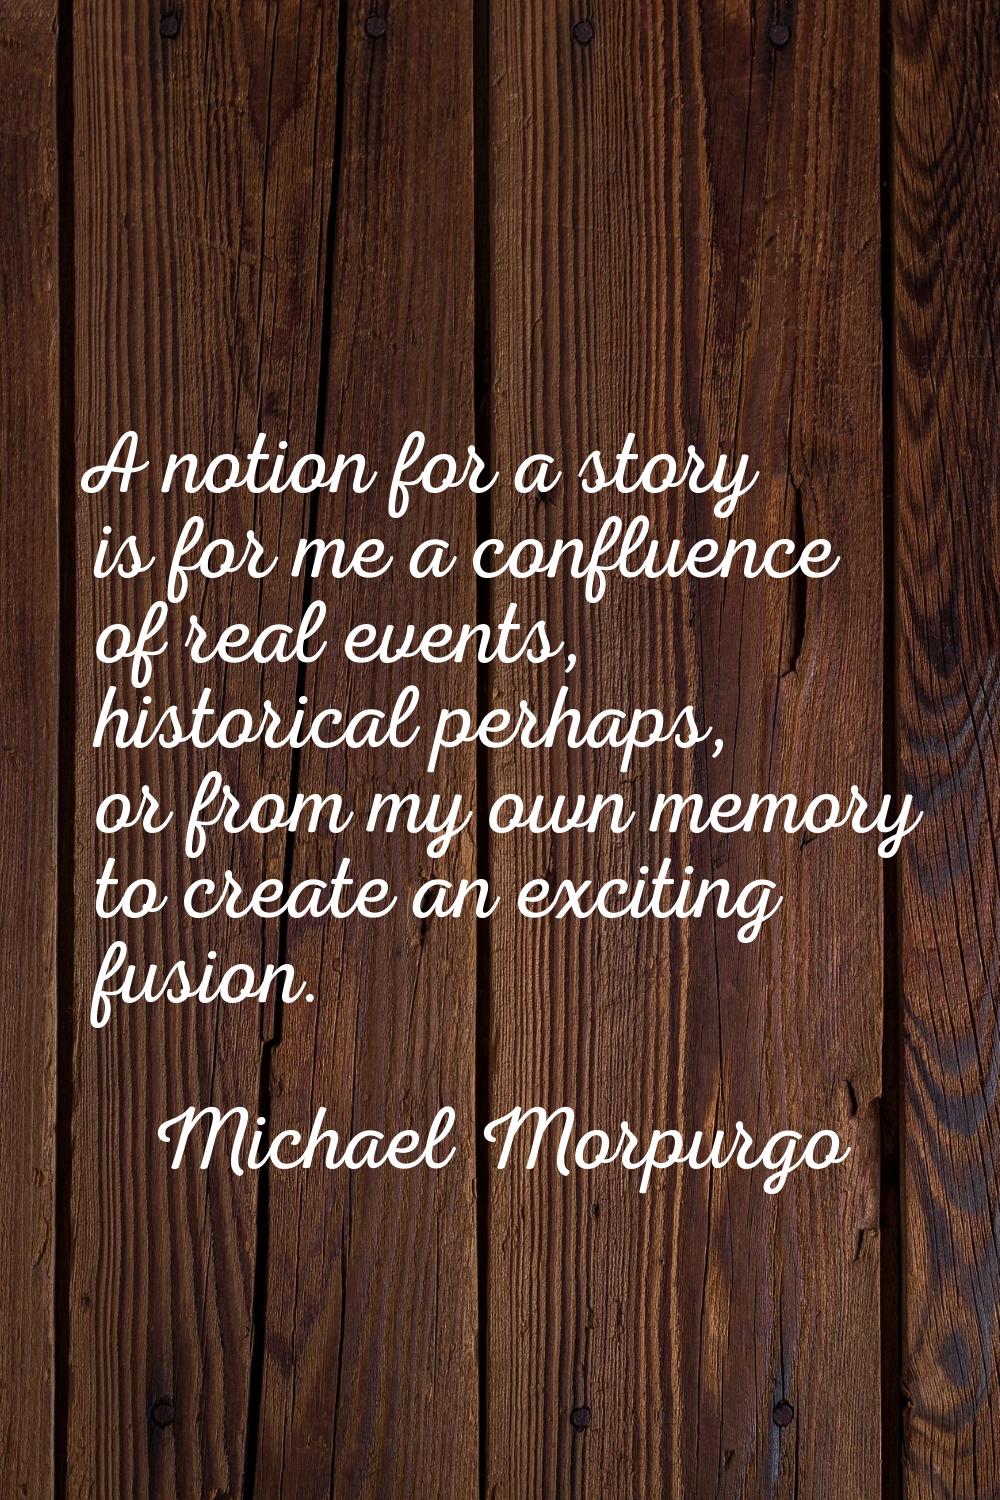 A notion for a story is for me a confluence of real events, historical perhaps, or from my own memo